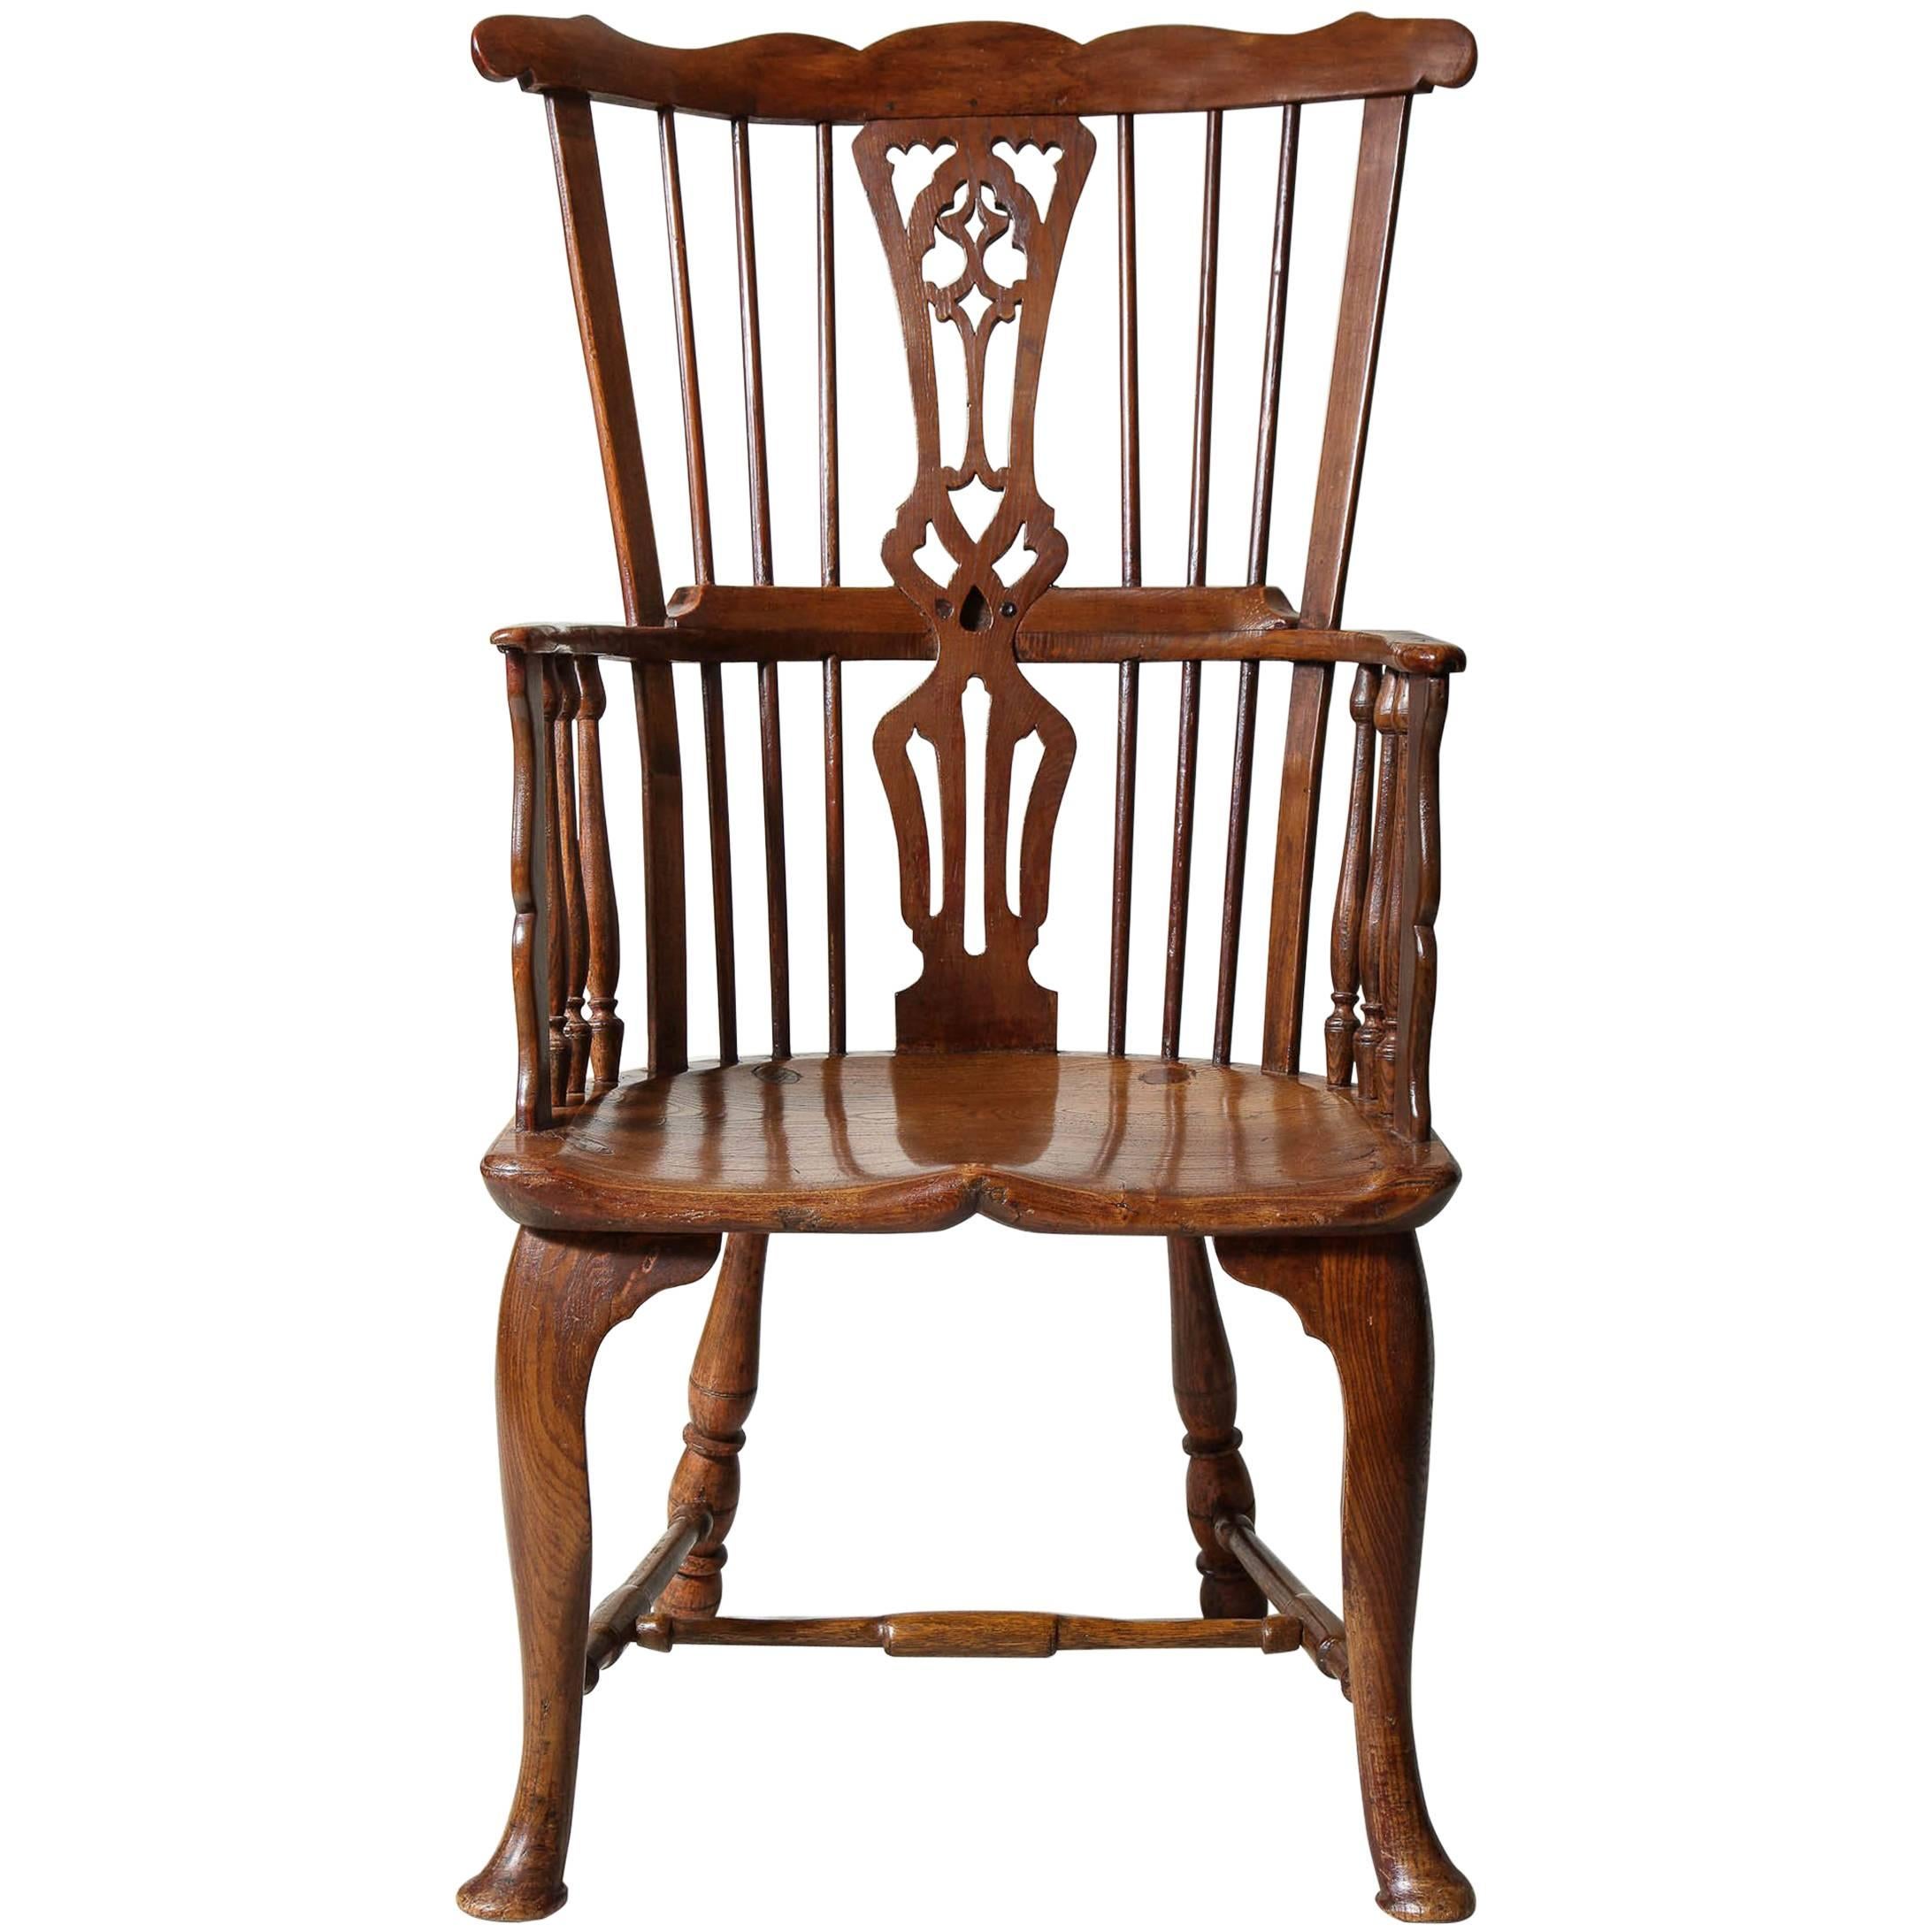 Exceptional 18th Century Windsor Armchair